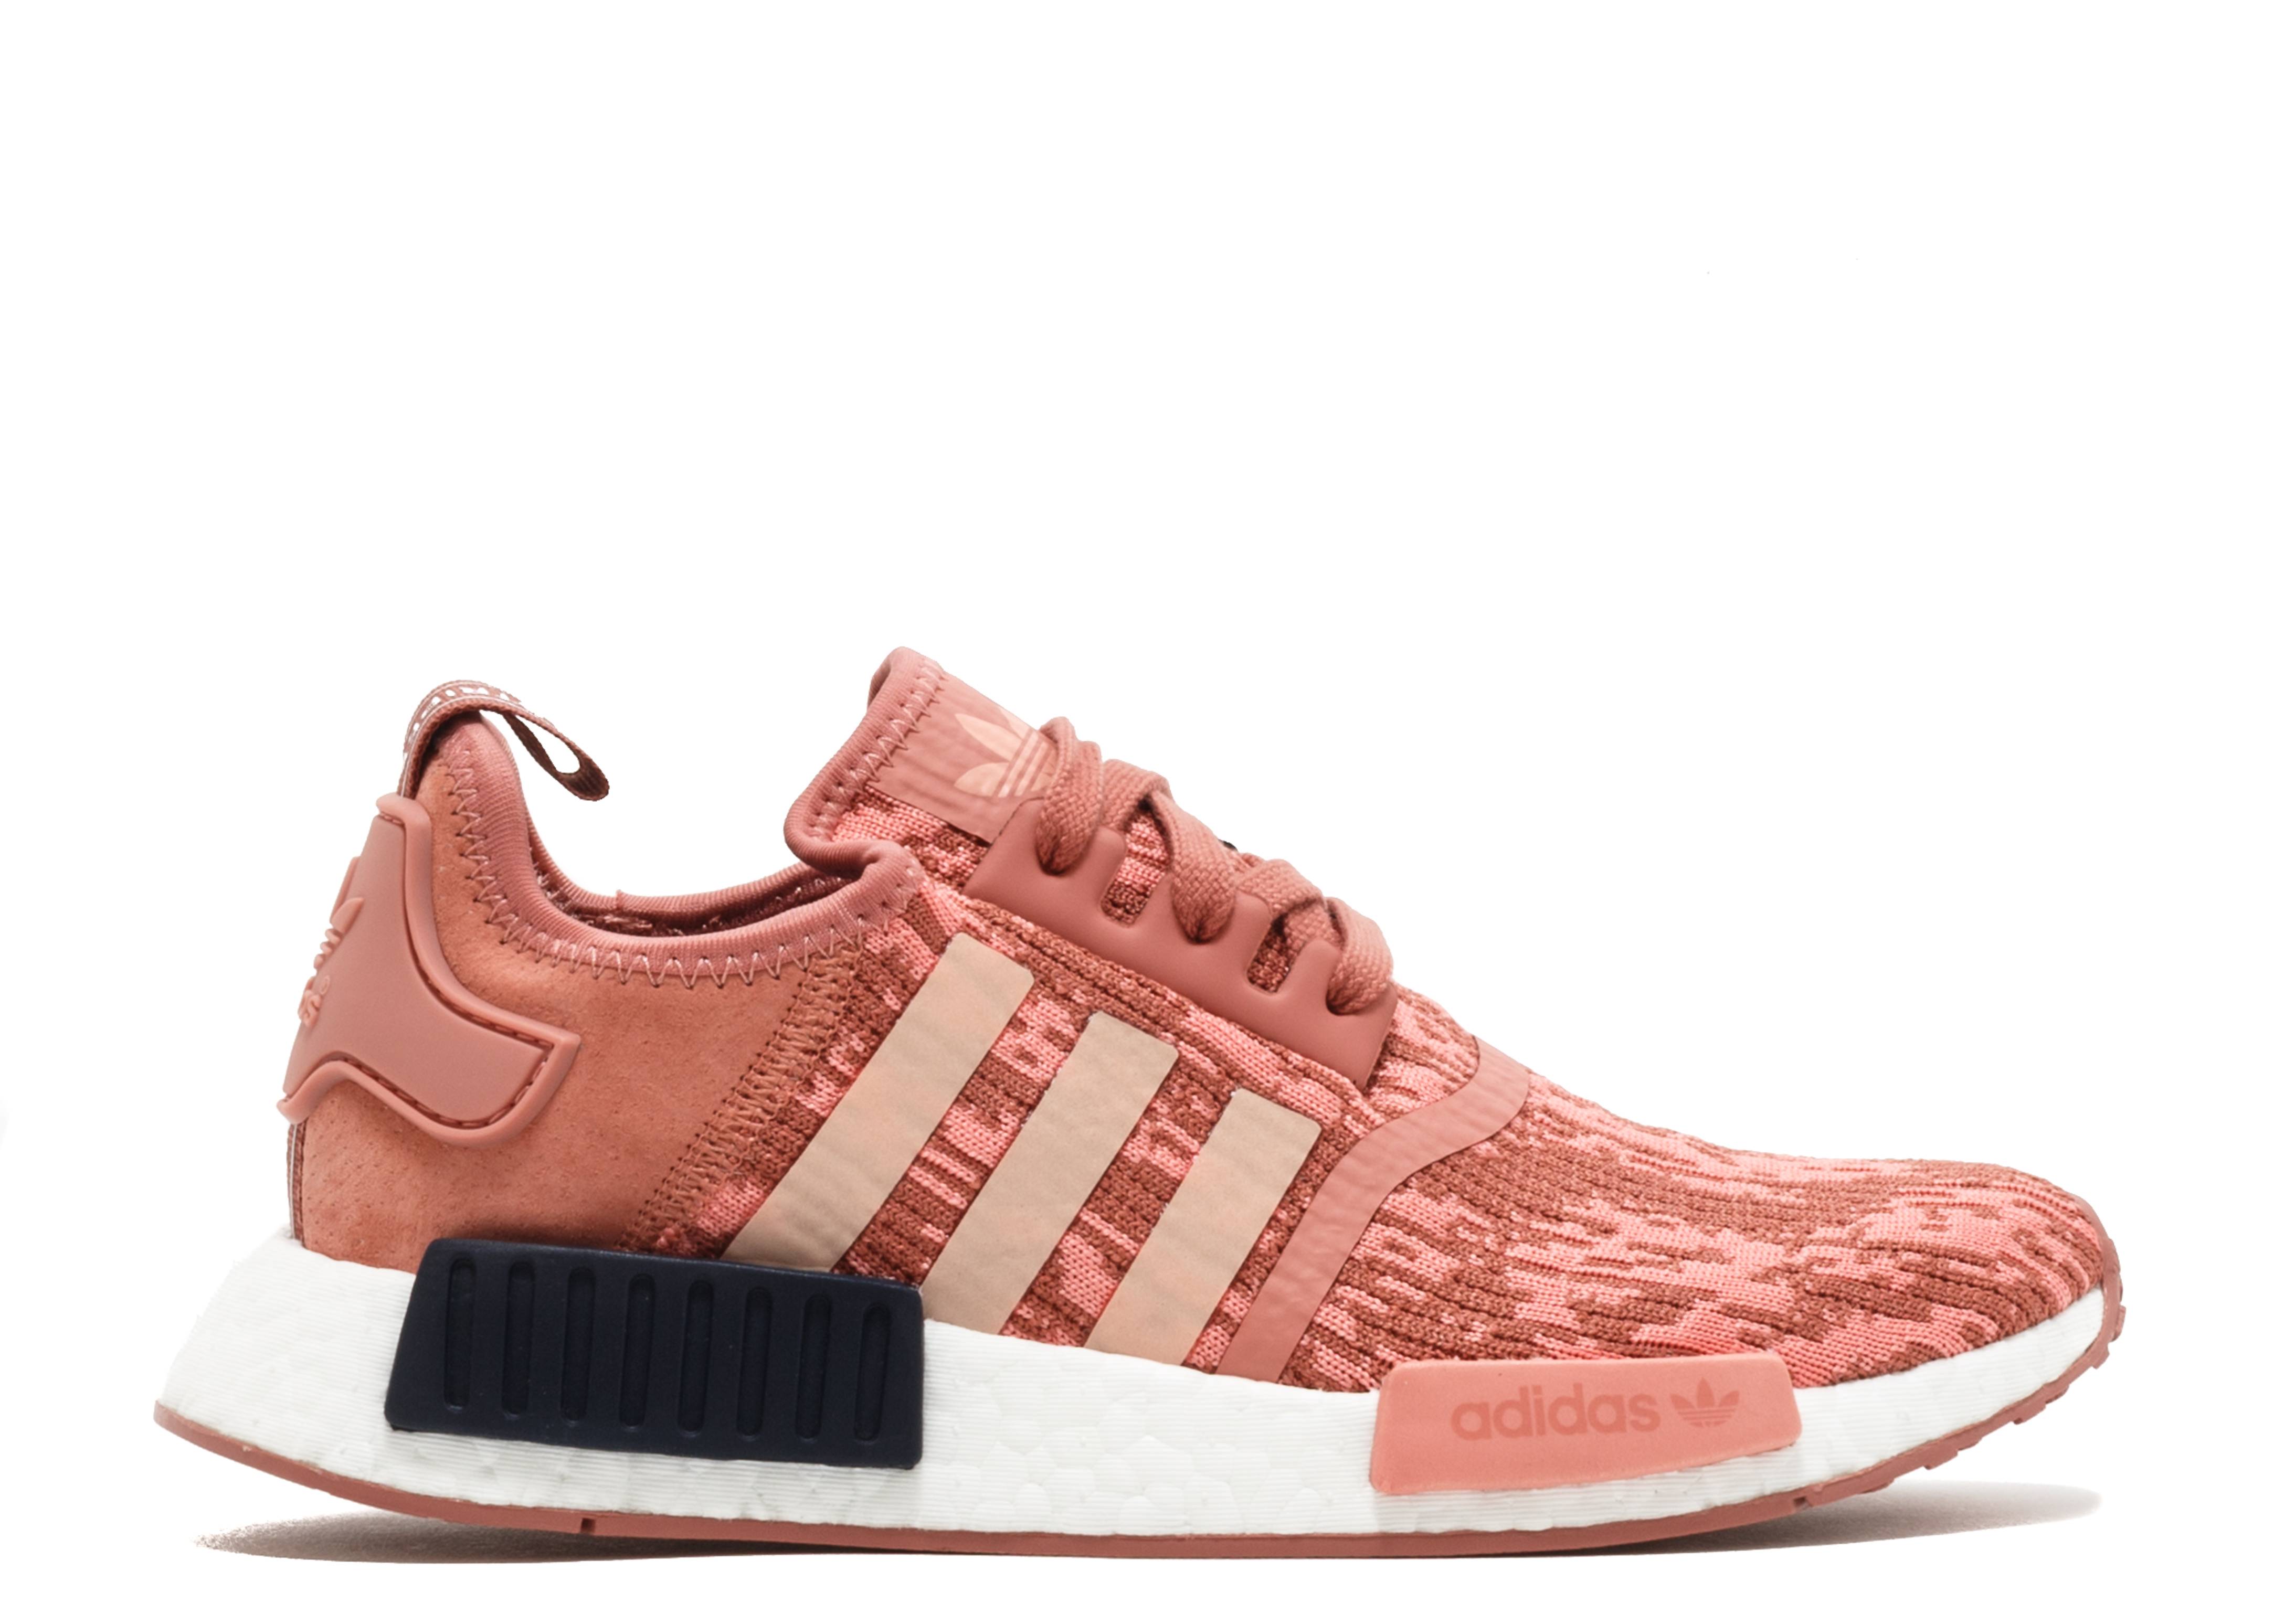 Wmns NMD_R1 'Raw Pink'